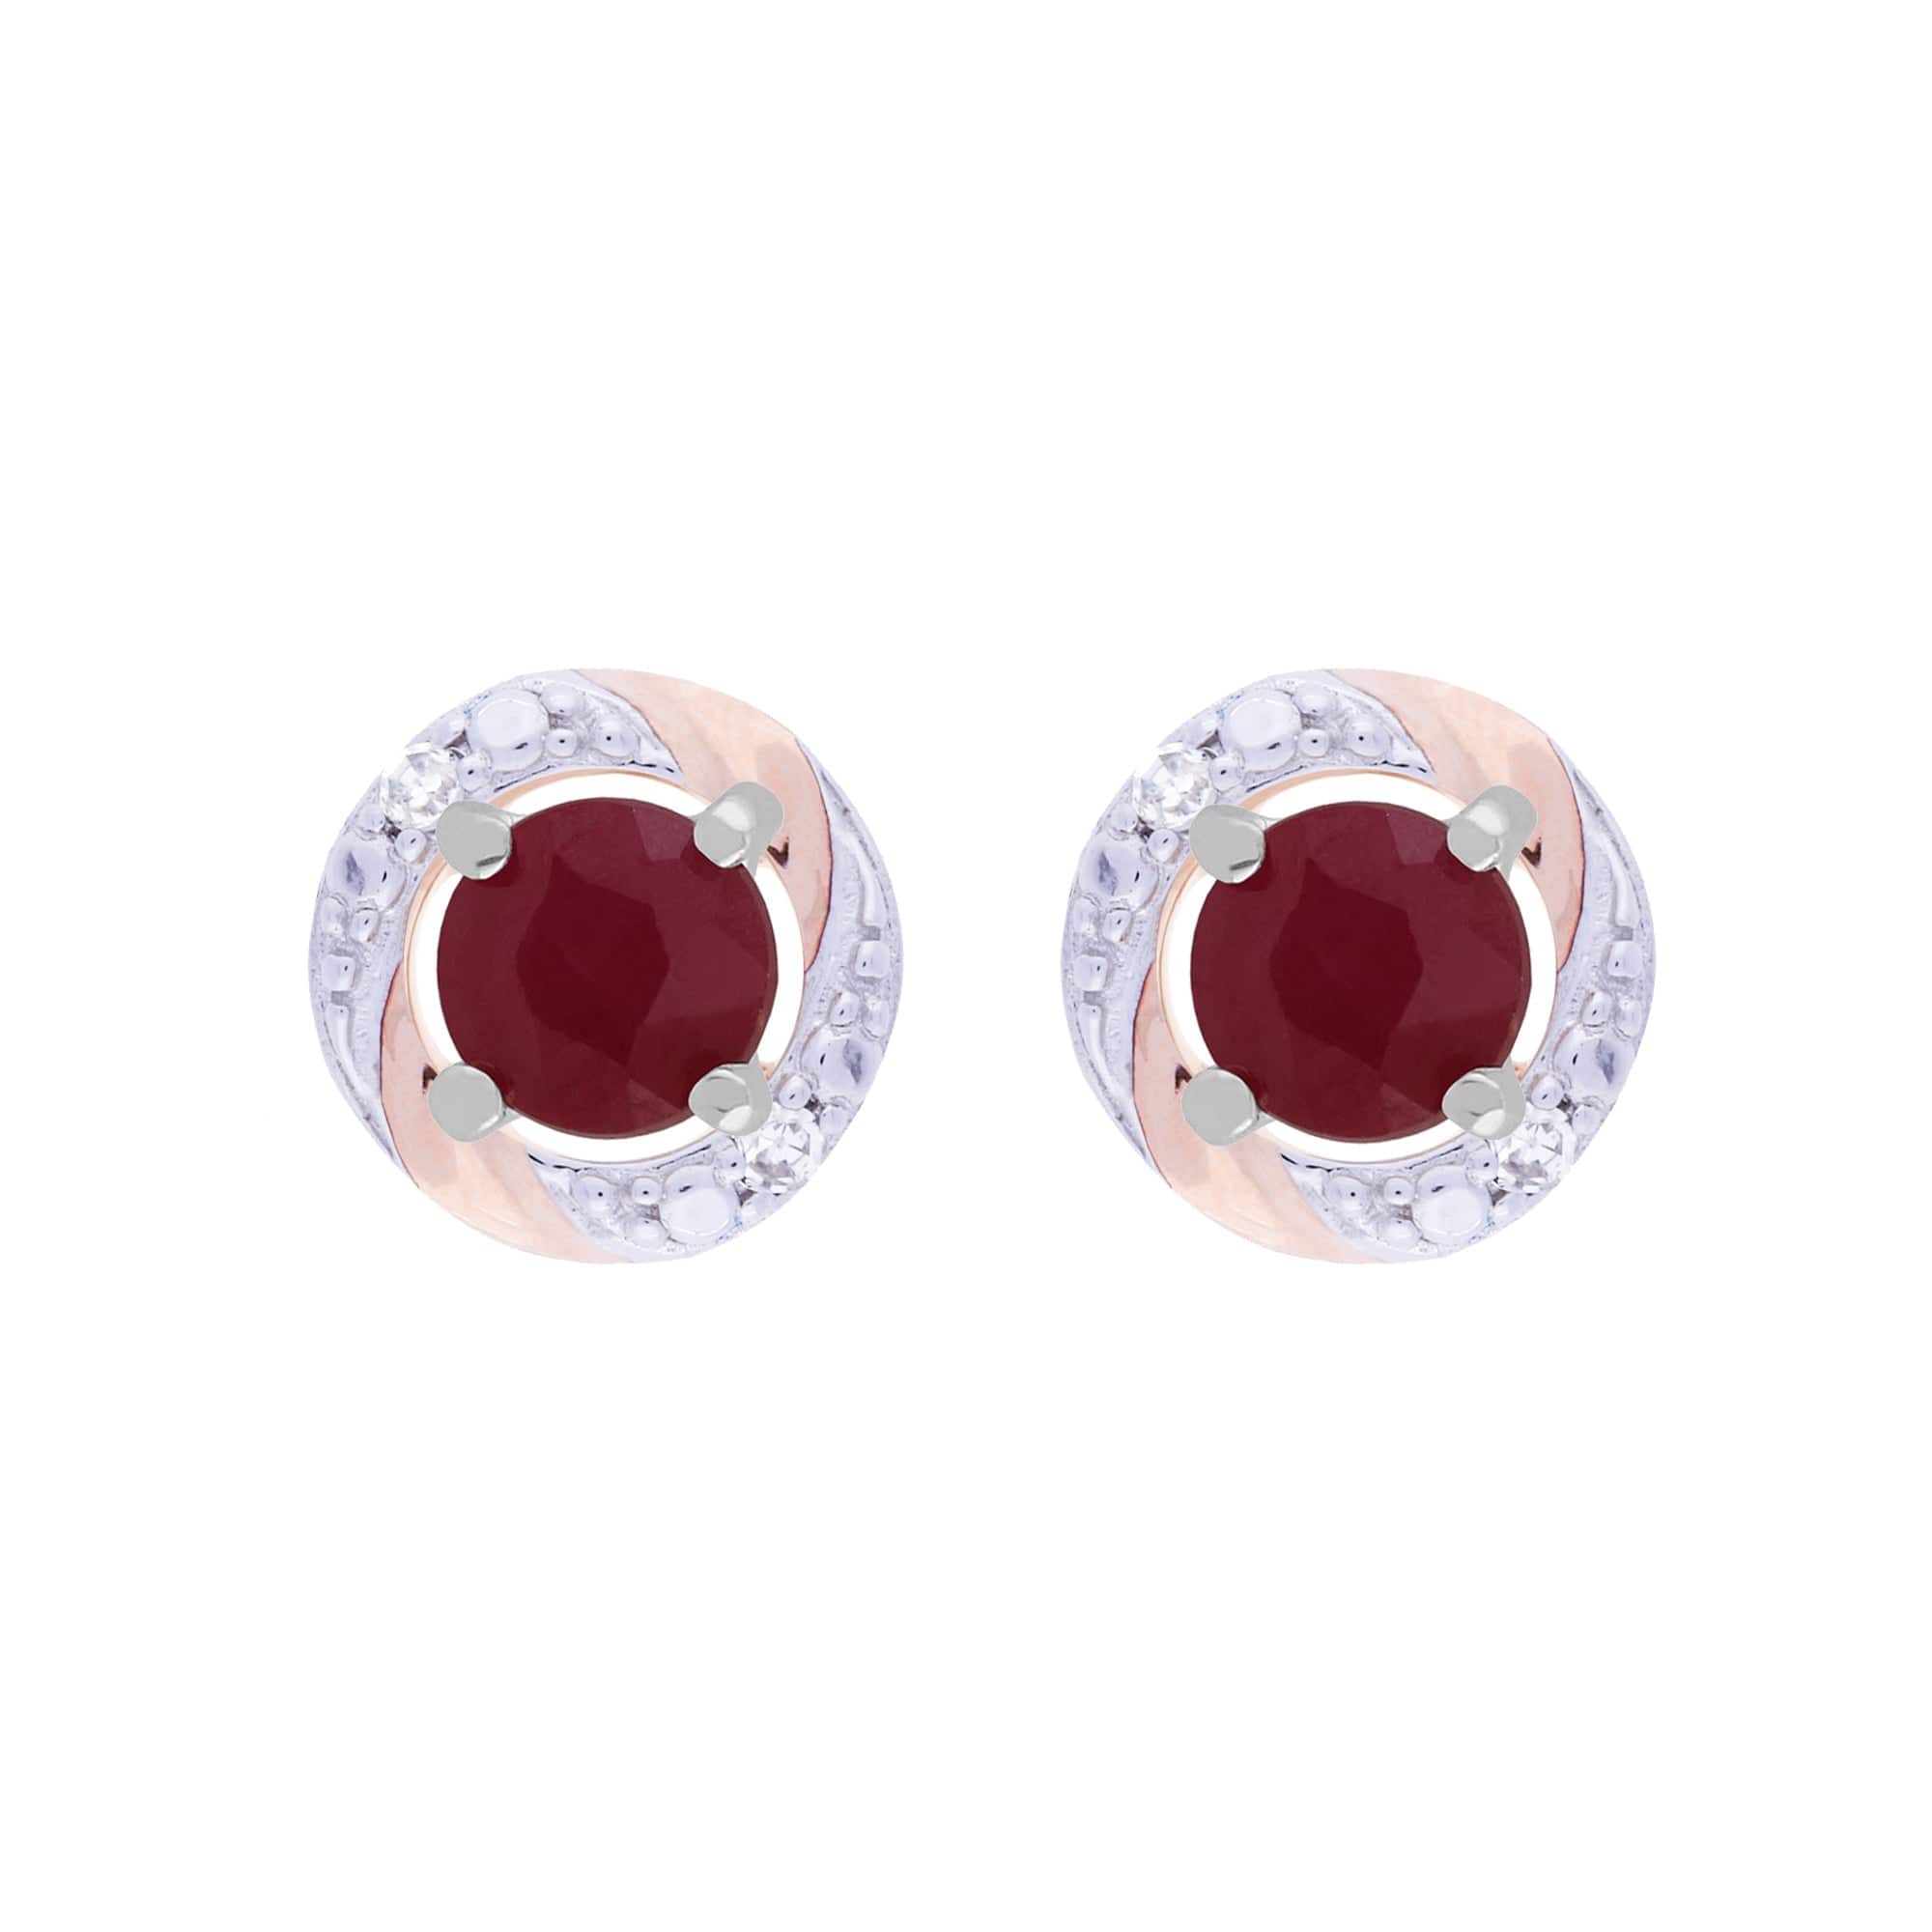 11622-191E0378019 Classic Round Ruby Stud Earrings with Detachable Diamond Round Earrings Jacket Set in 9ct White Gold 1